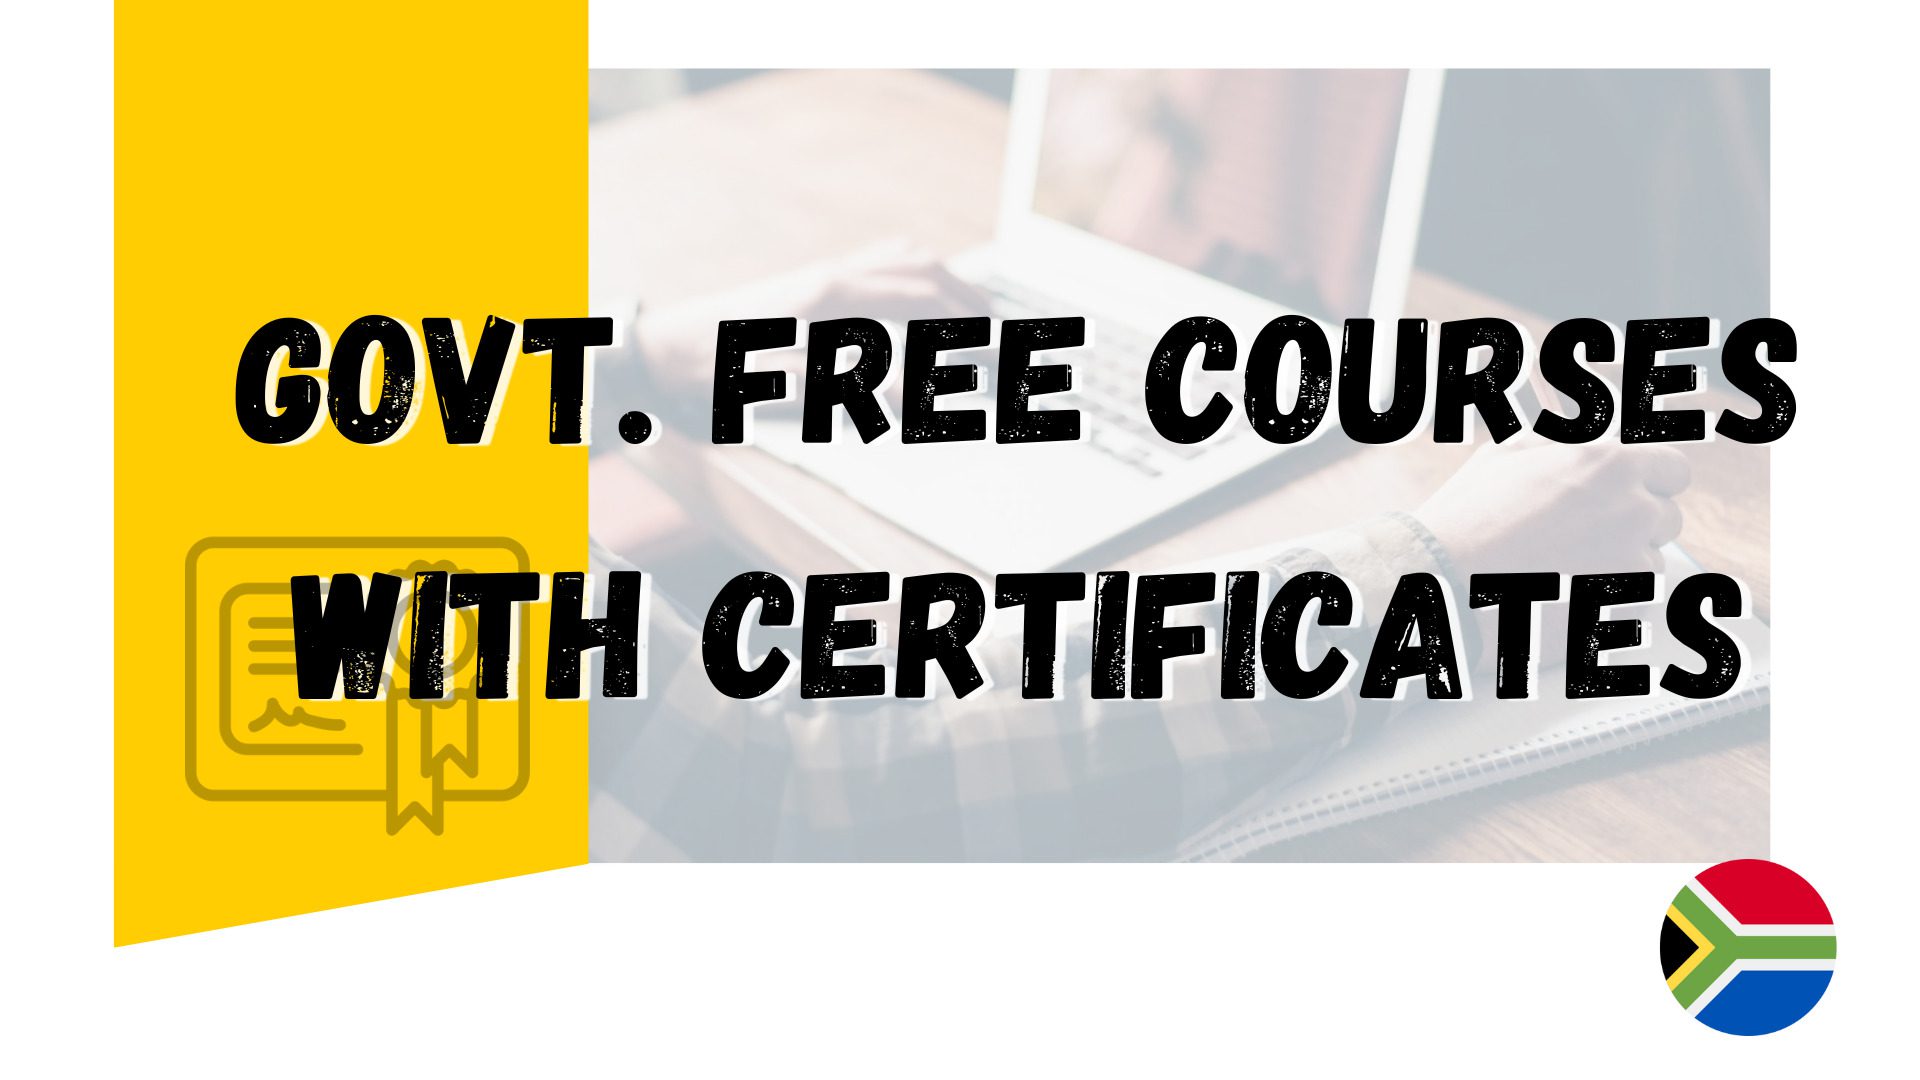 Govt. Free Courses With Certificates 1 